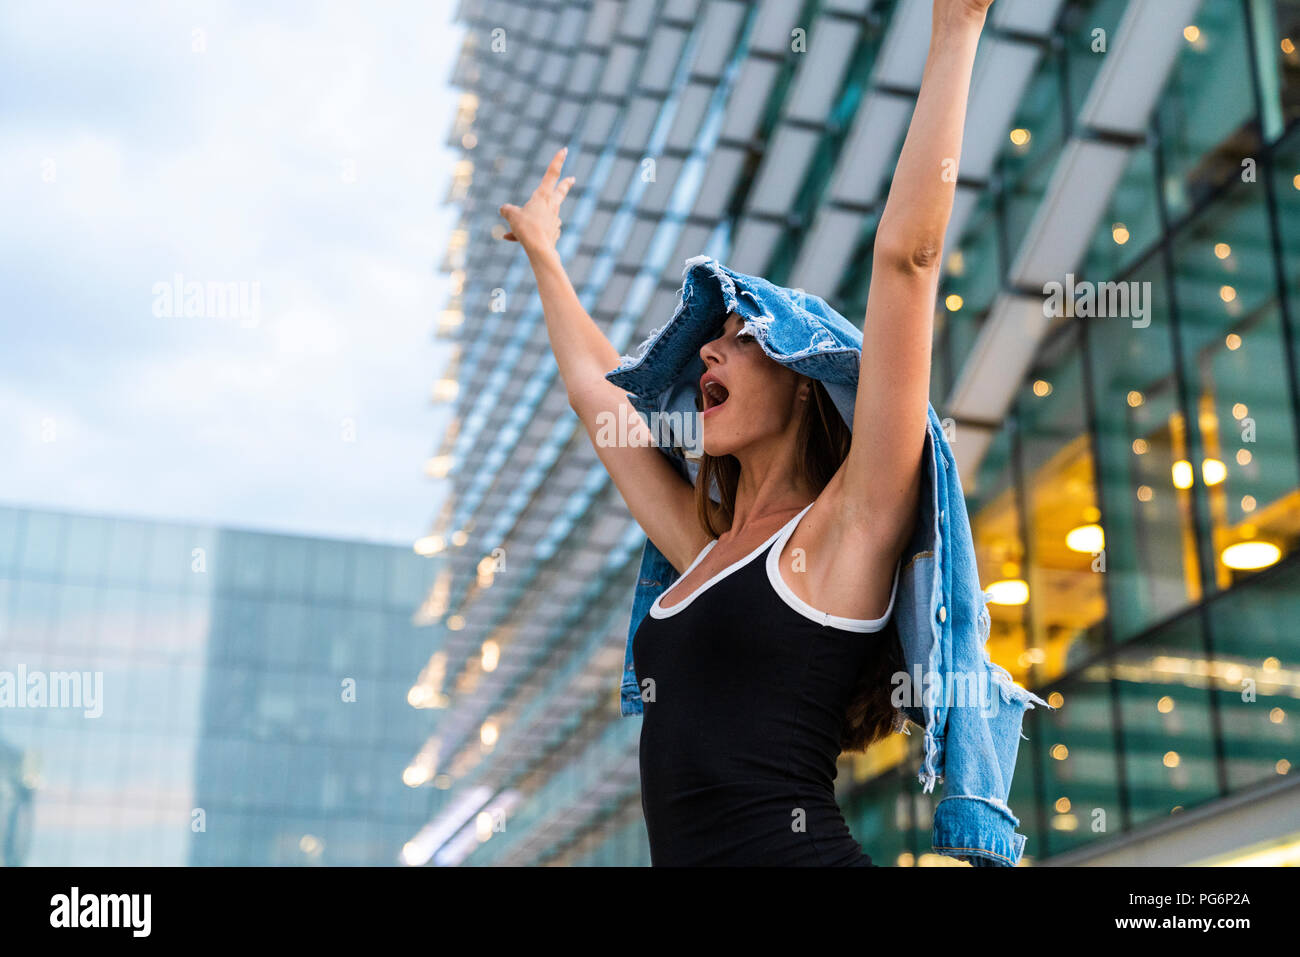 Carefree young woman wearing black dress in the city at dusk Stock Photo